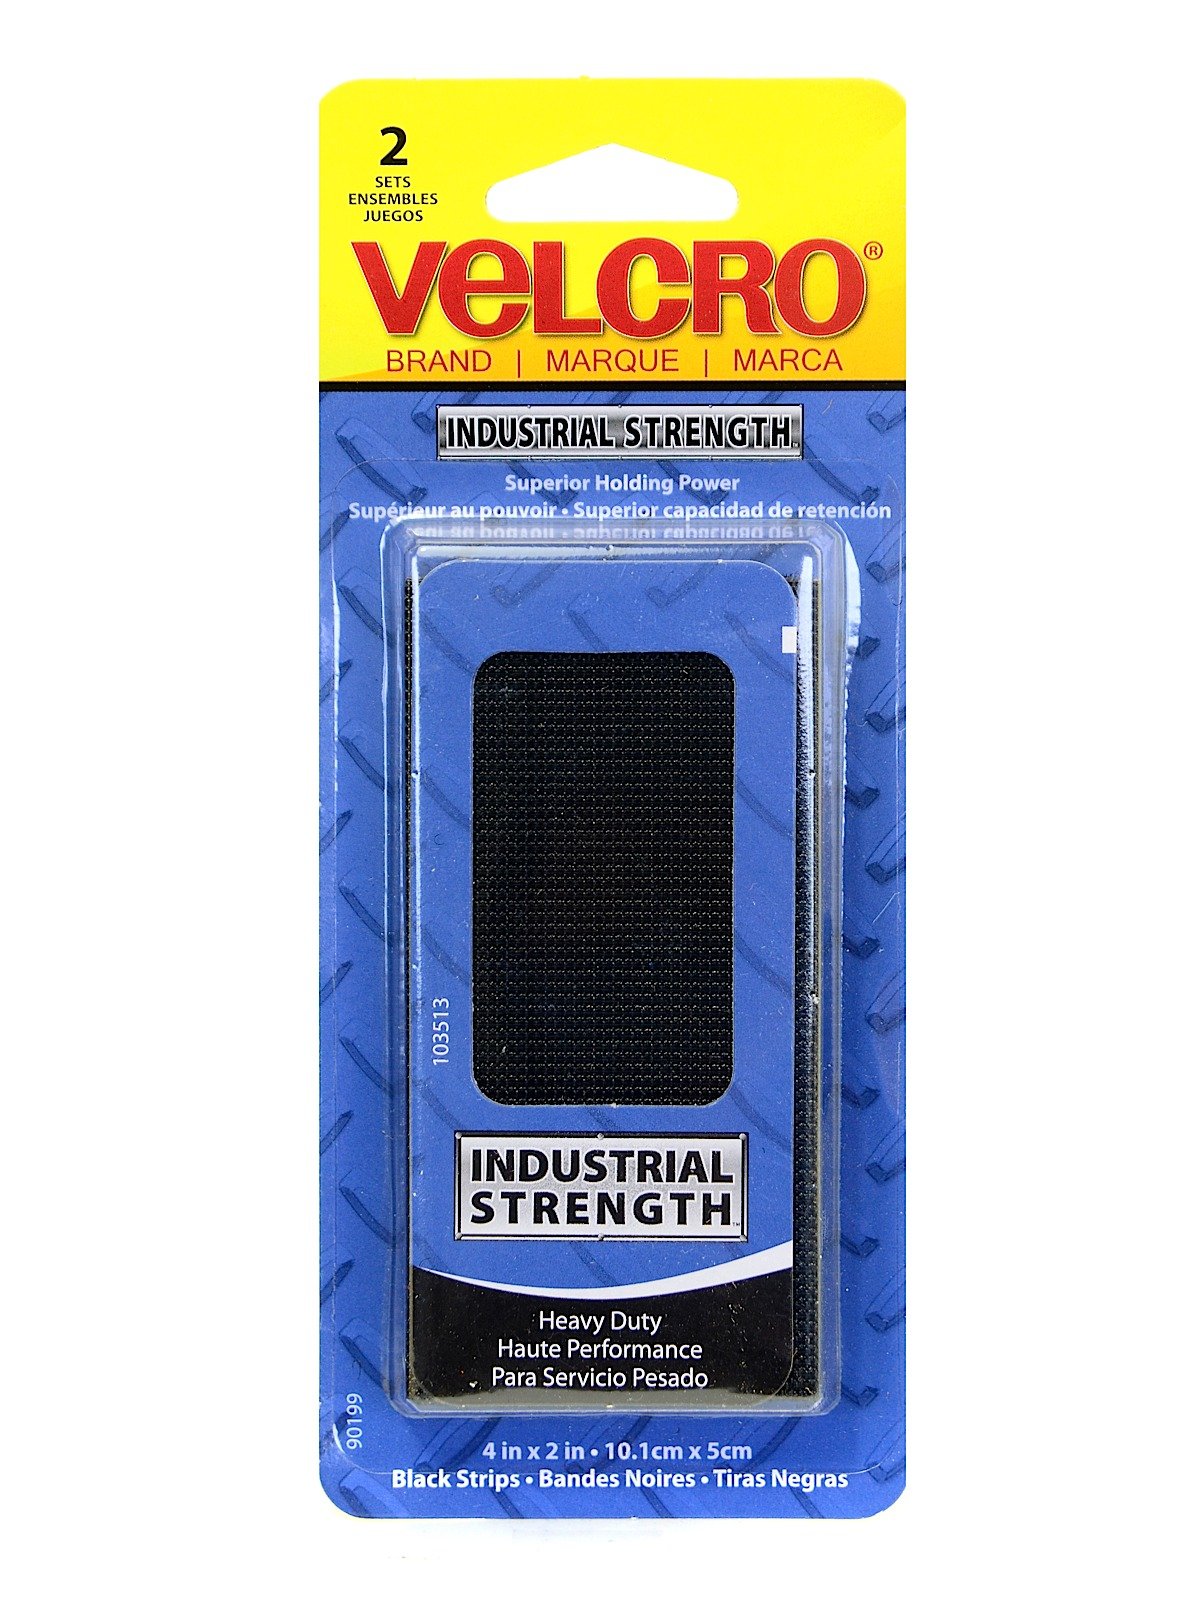 How To Use VELCRO Industrial Strength Black Tape Velcro Review